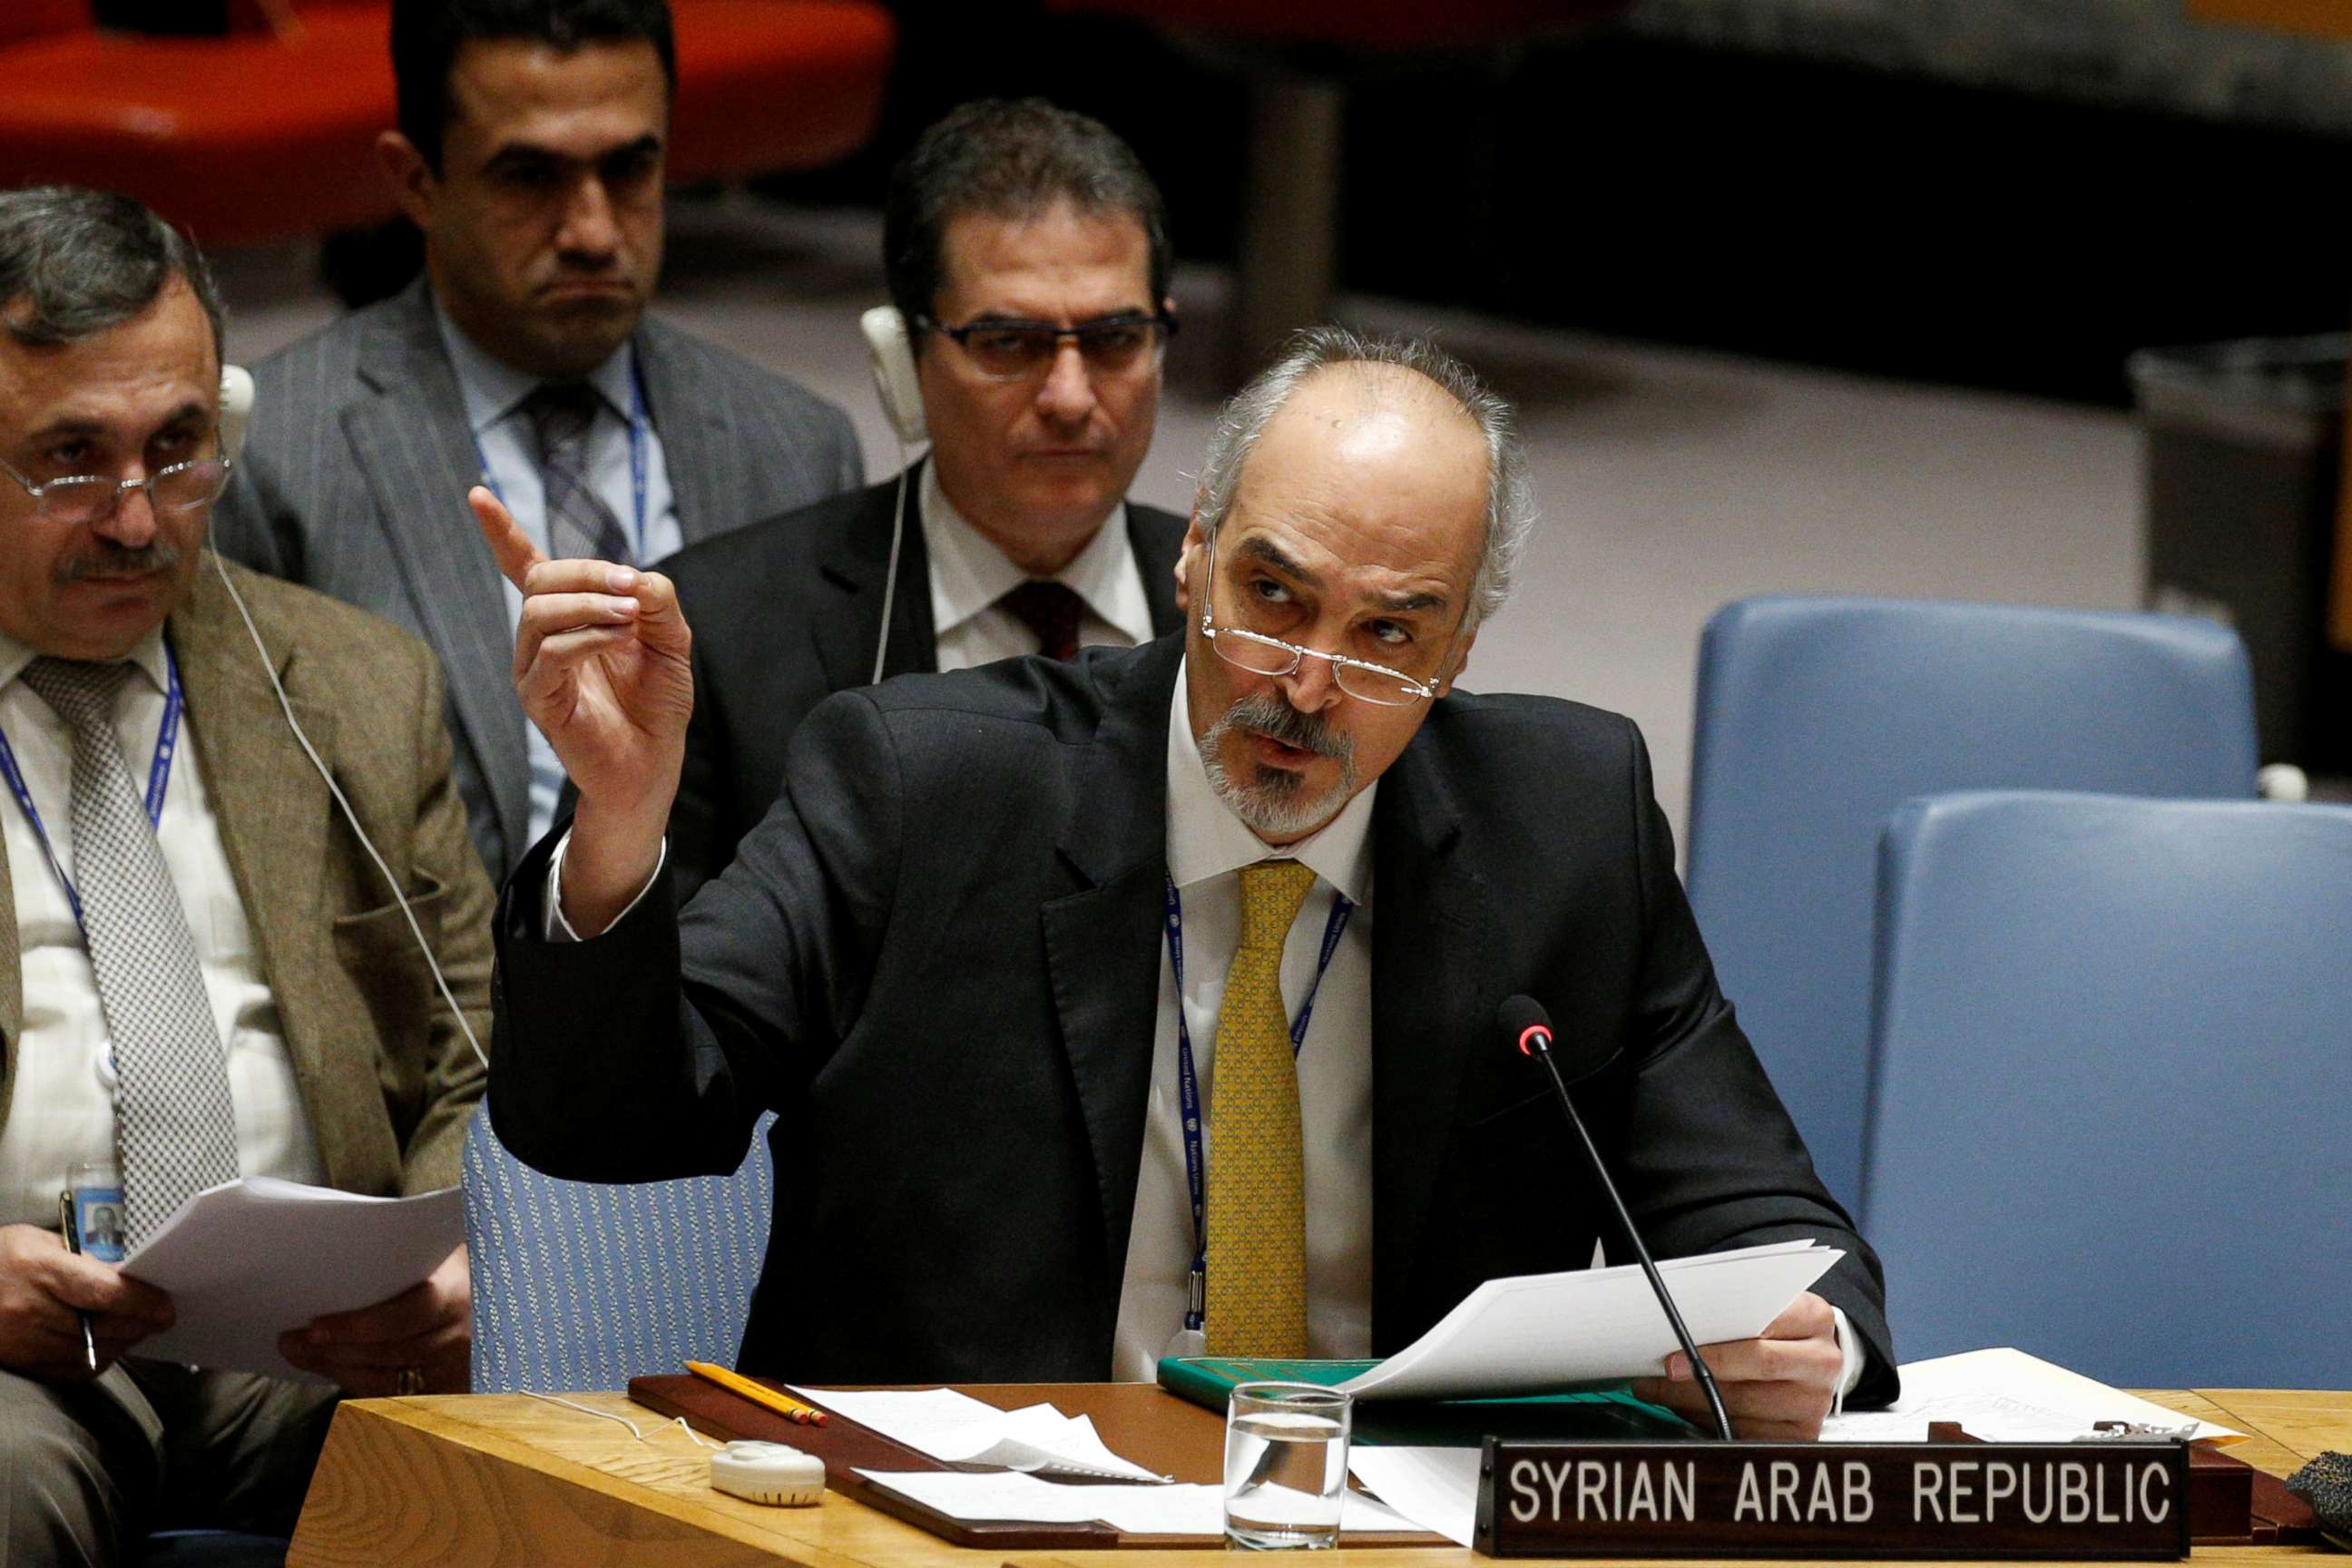 PHOTO: Syrian Arab Republic Ambassador to the United Nations Bashar Jaafari speaks during a United Nations Security Council meeting on Syria at the United Nations headquarters in New York, Feb. 22, 2018.